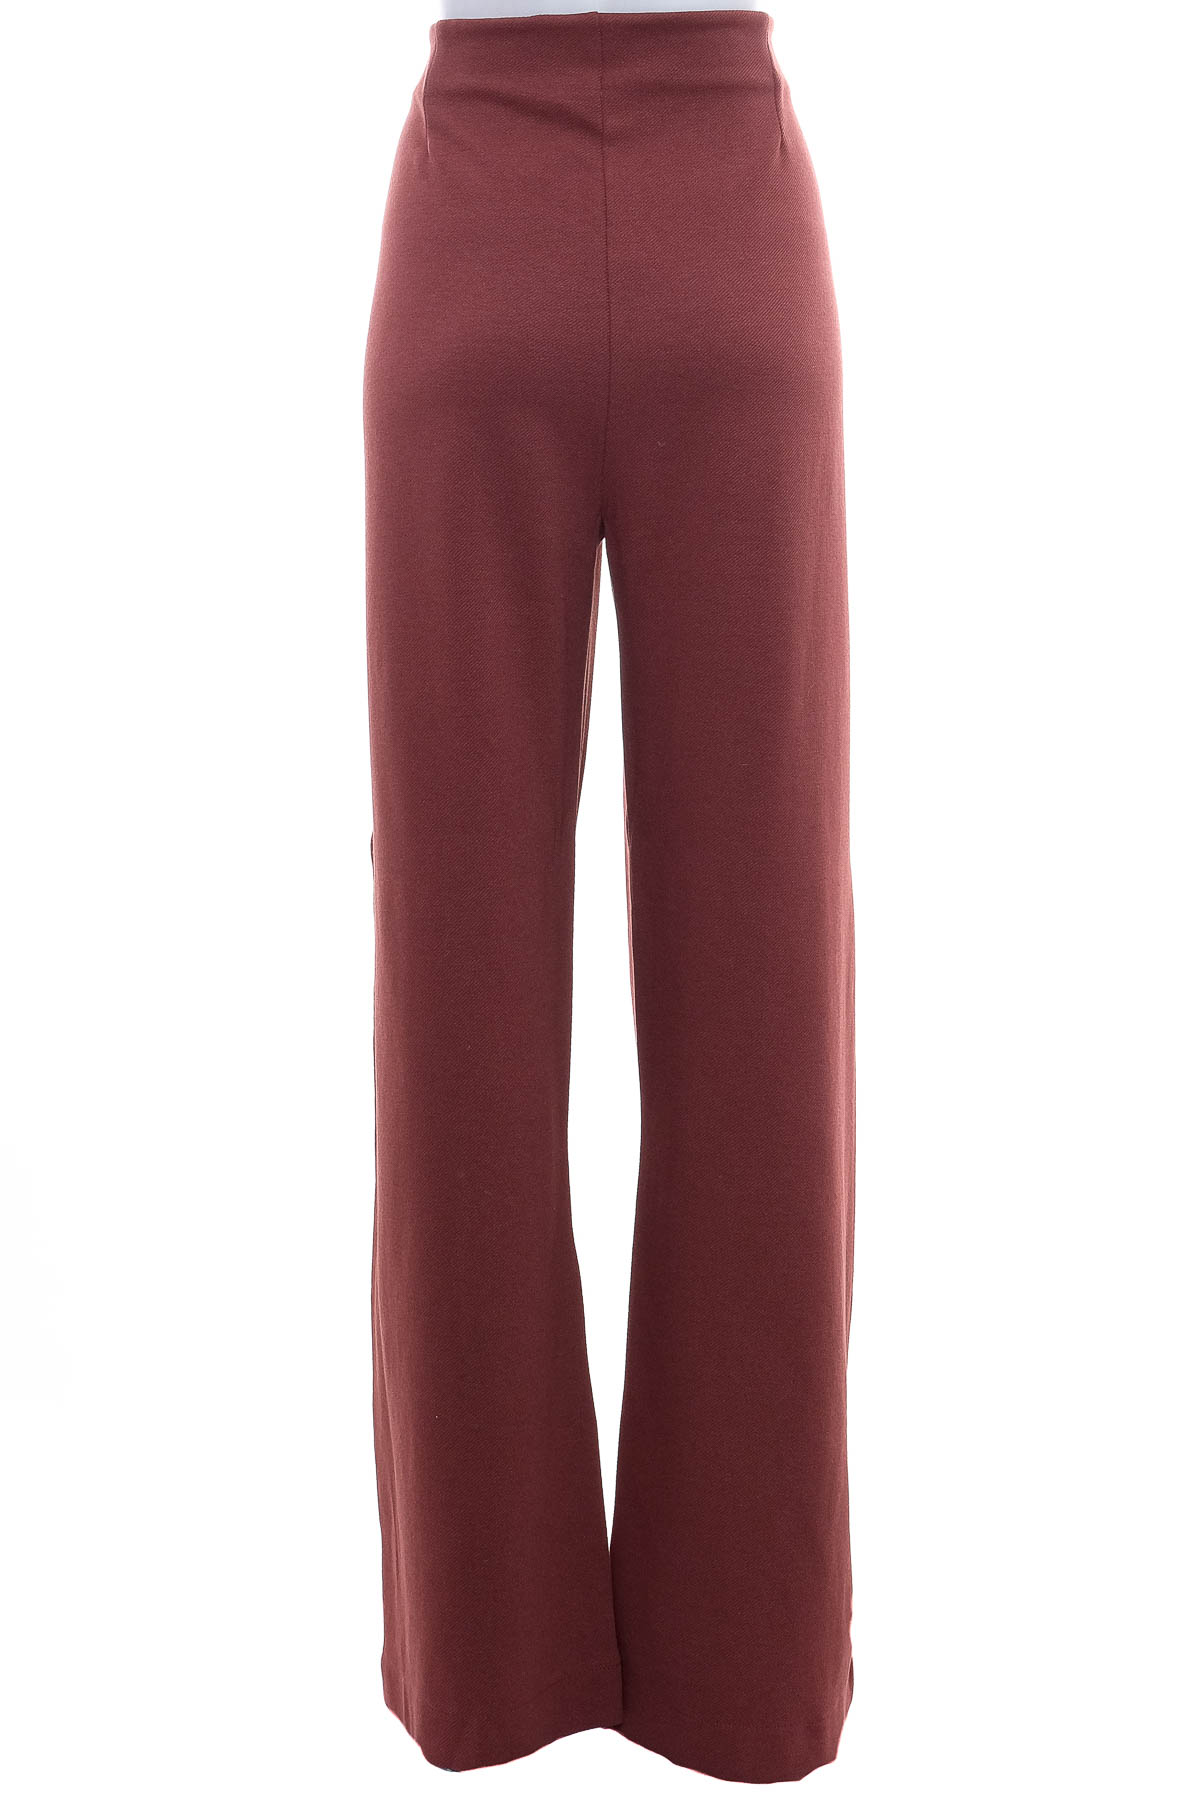 Women's trousers - Coco - 1